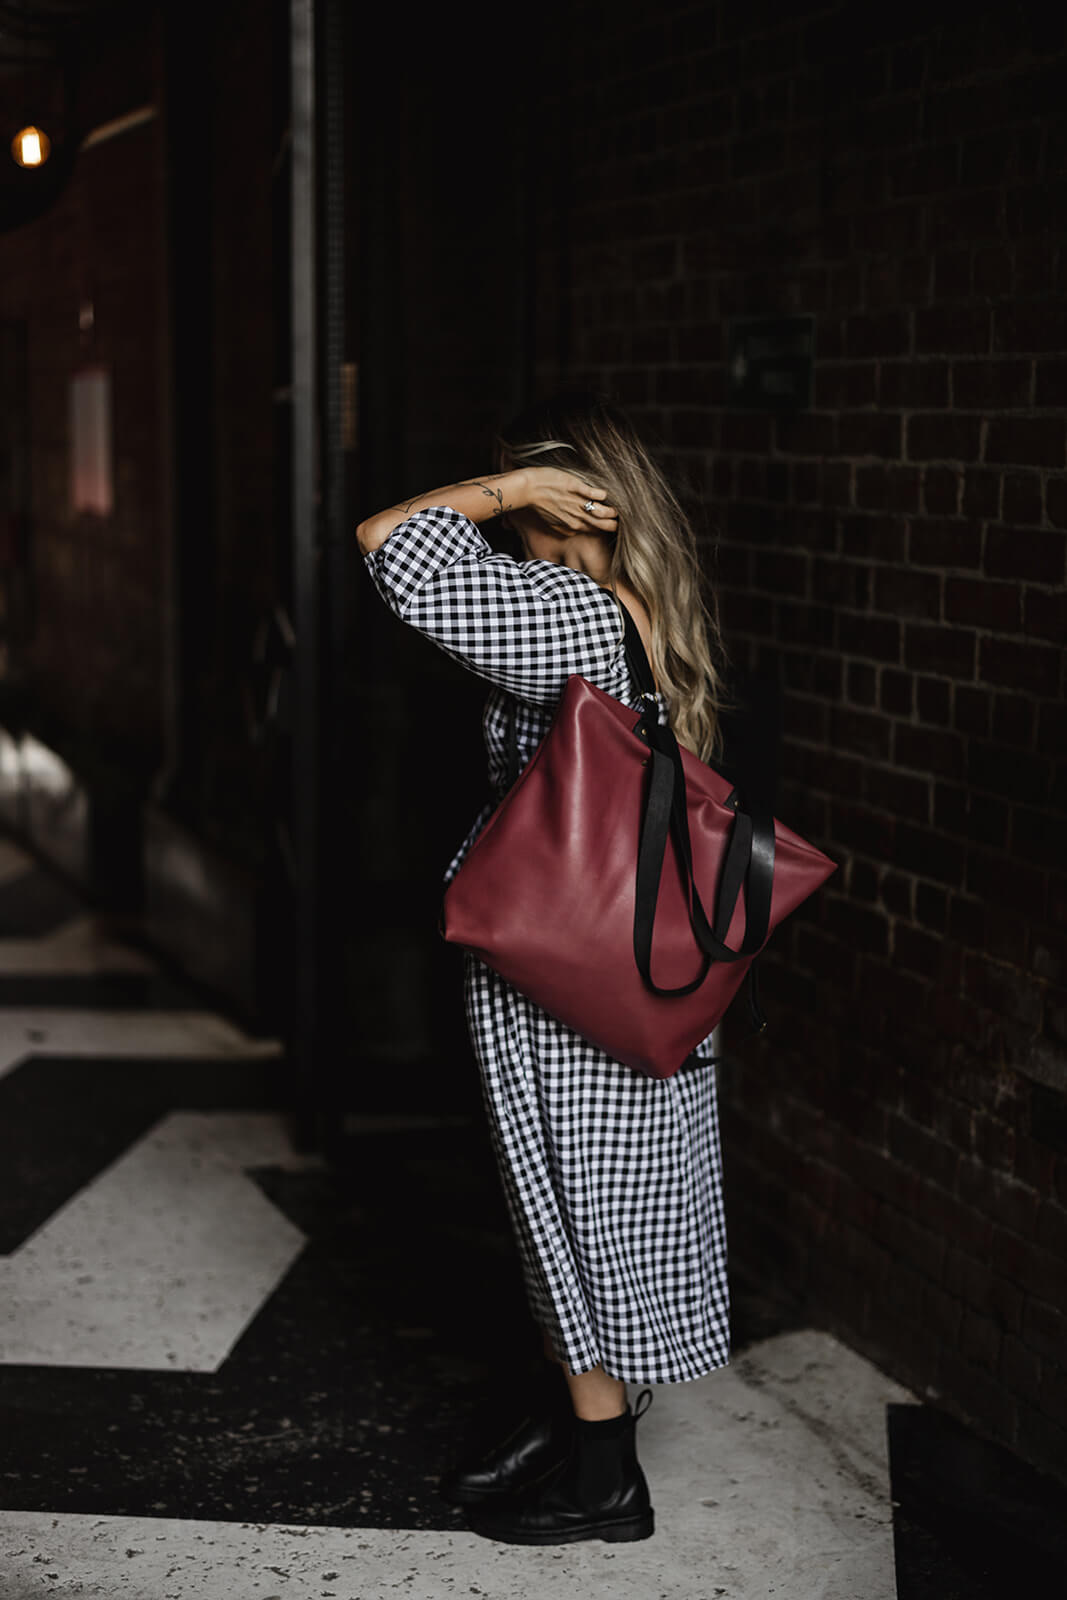 Woman standing in alley with brick wall and black and white ground. She is wearing black and white dress, black boots and a cherry leather backpack with black straps. The backpack is the Cherry Leather Backpack & Tote by Ella Jackson